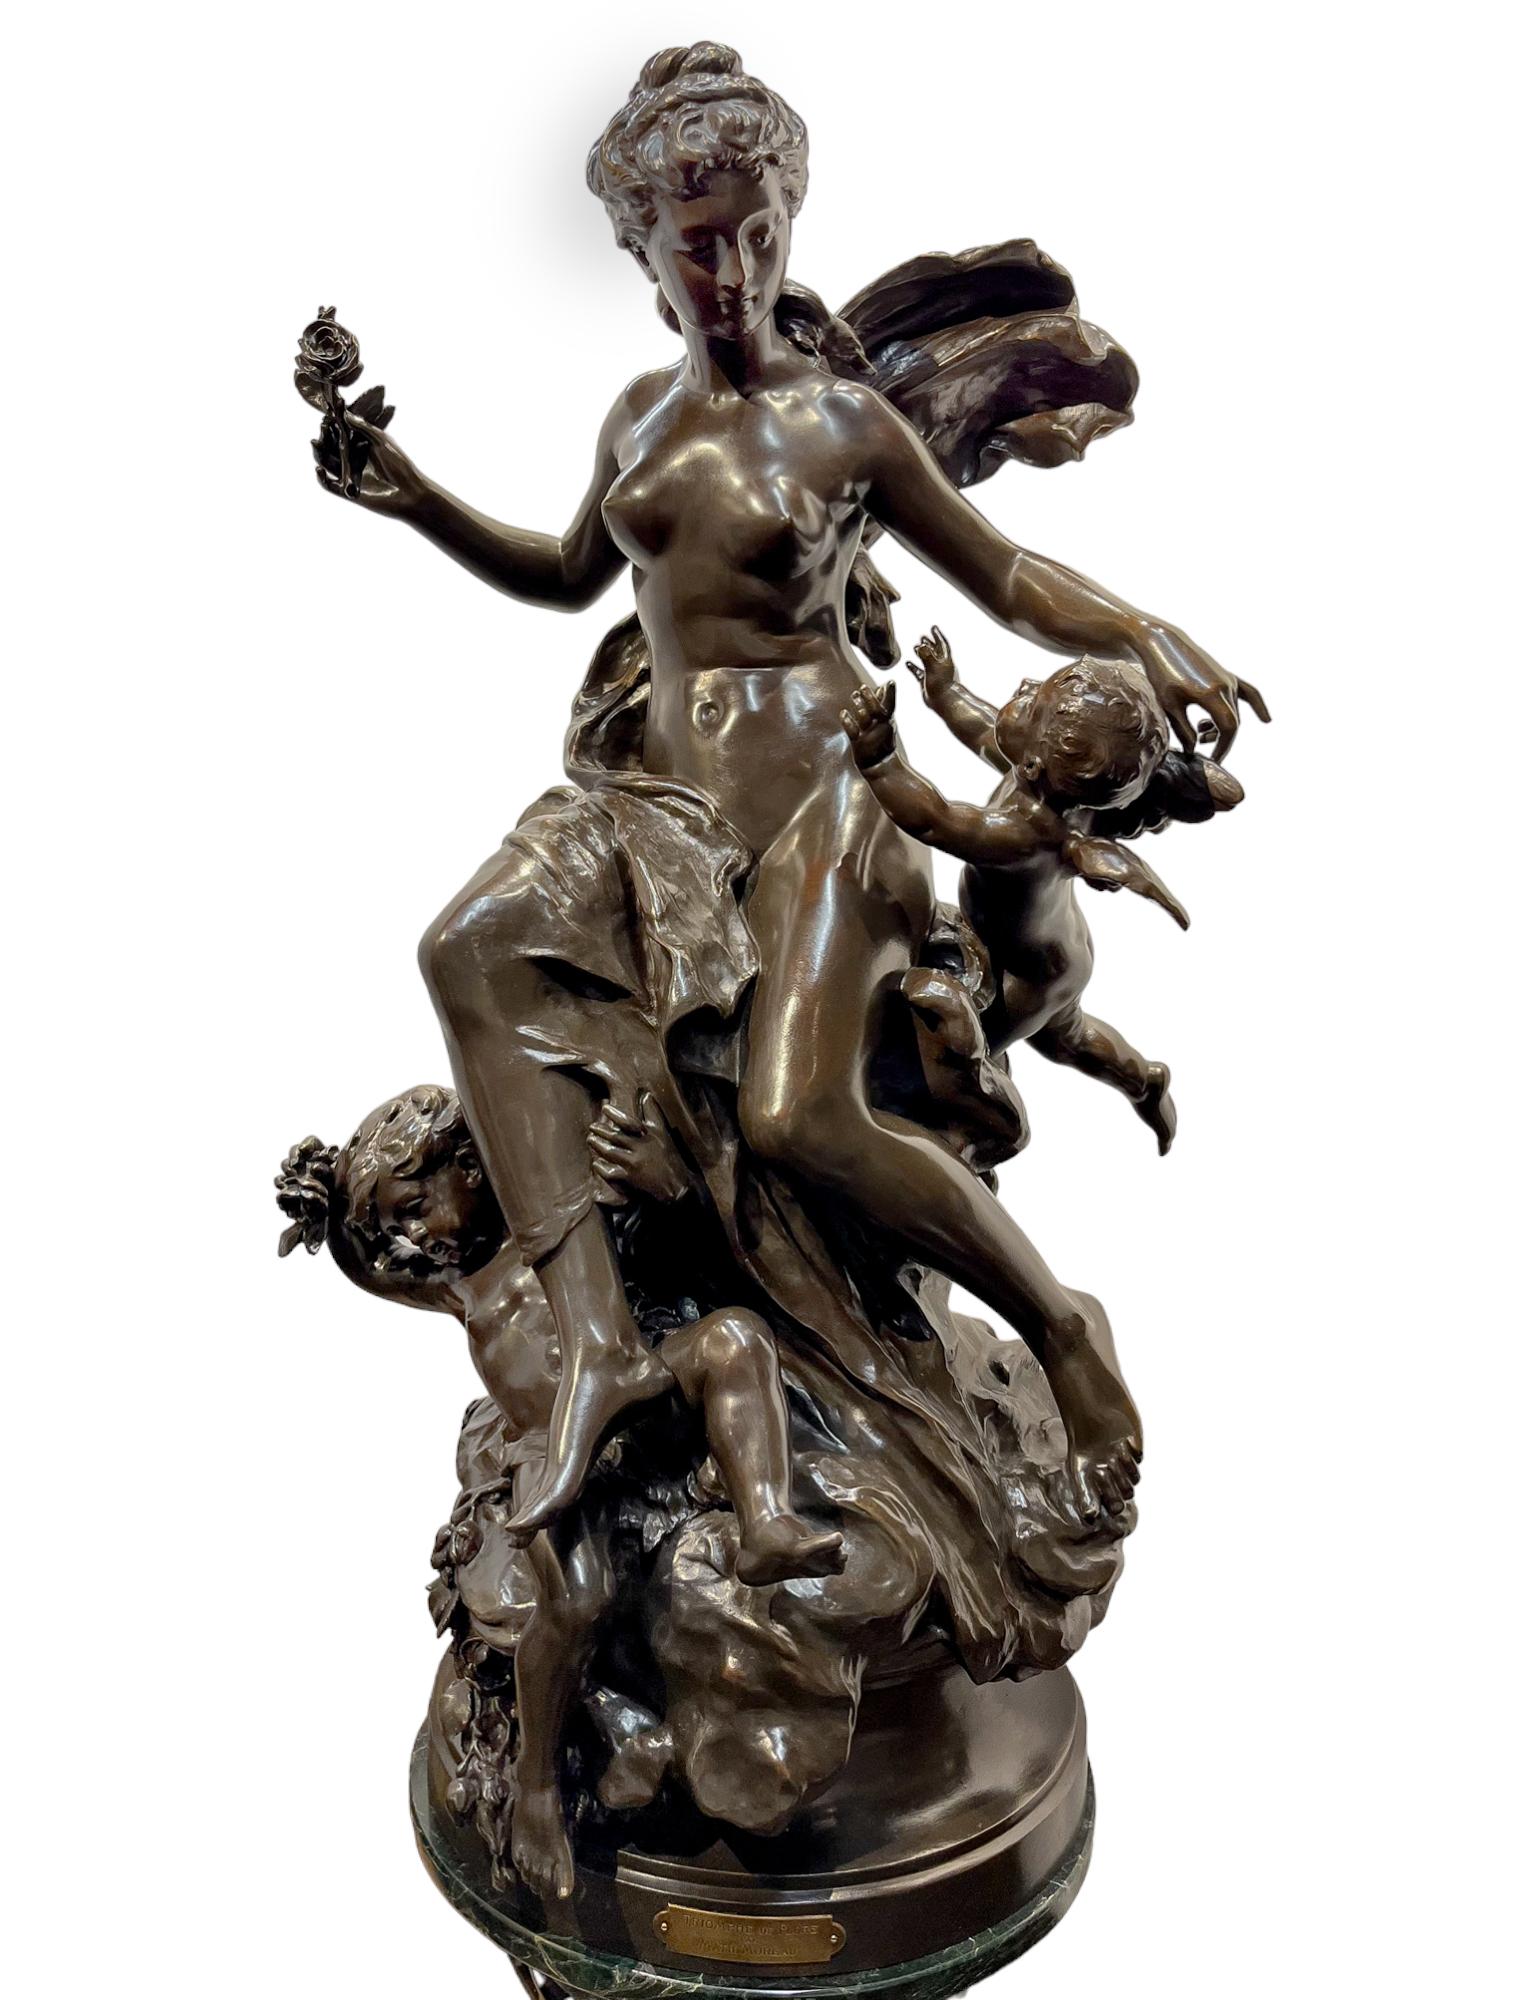 Mathurin Moreau Nude Sculpture - "The Triumph of Flora" Monumental French Patinated Bronze Statue